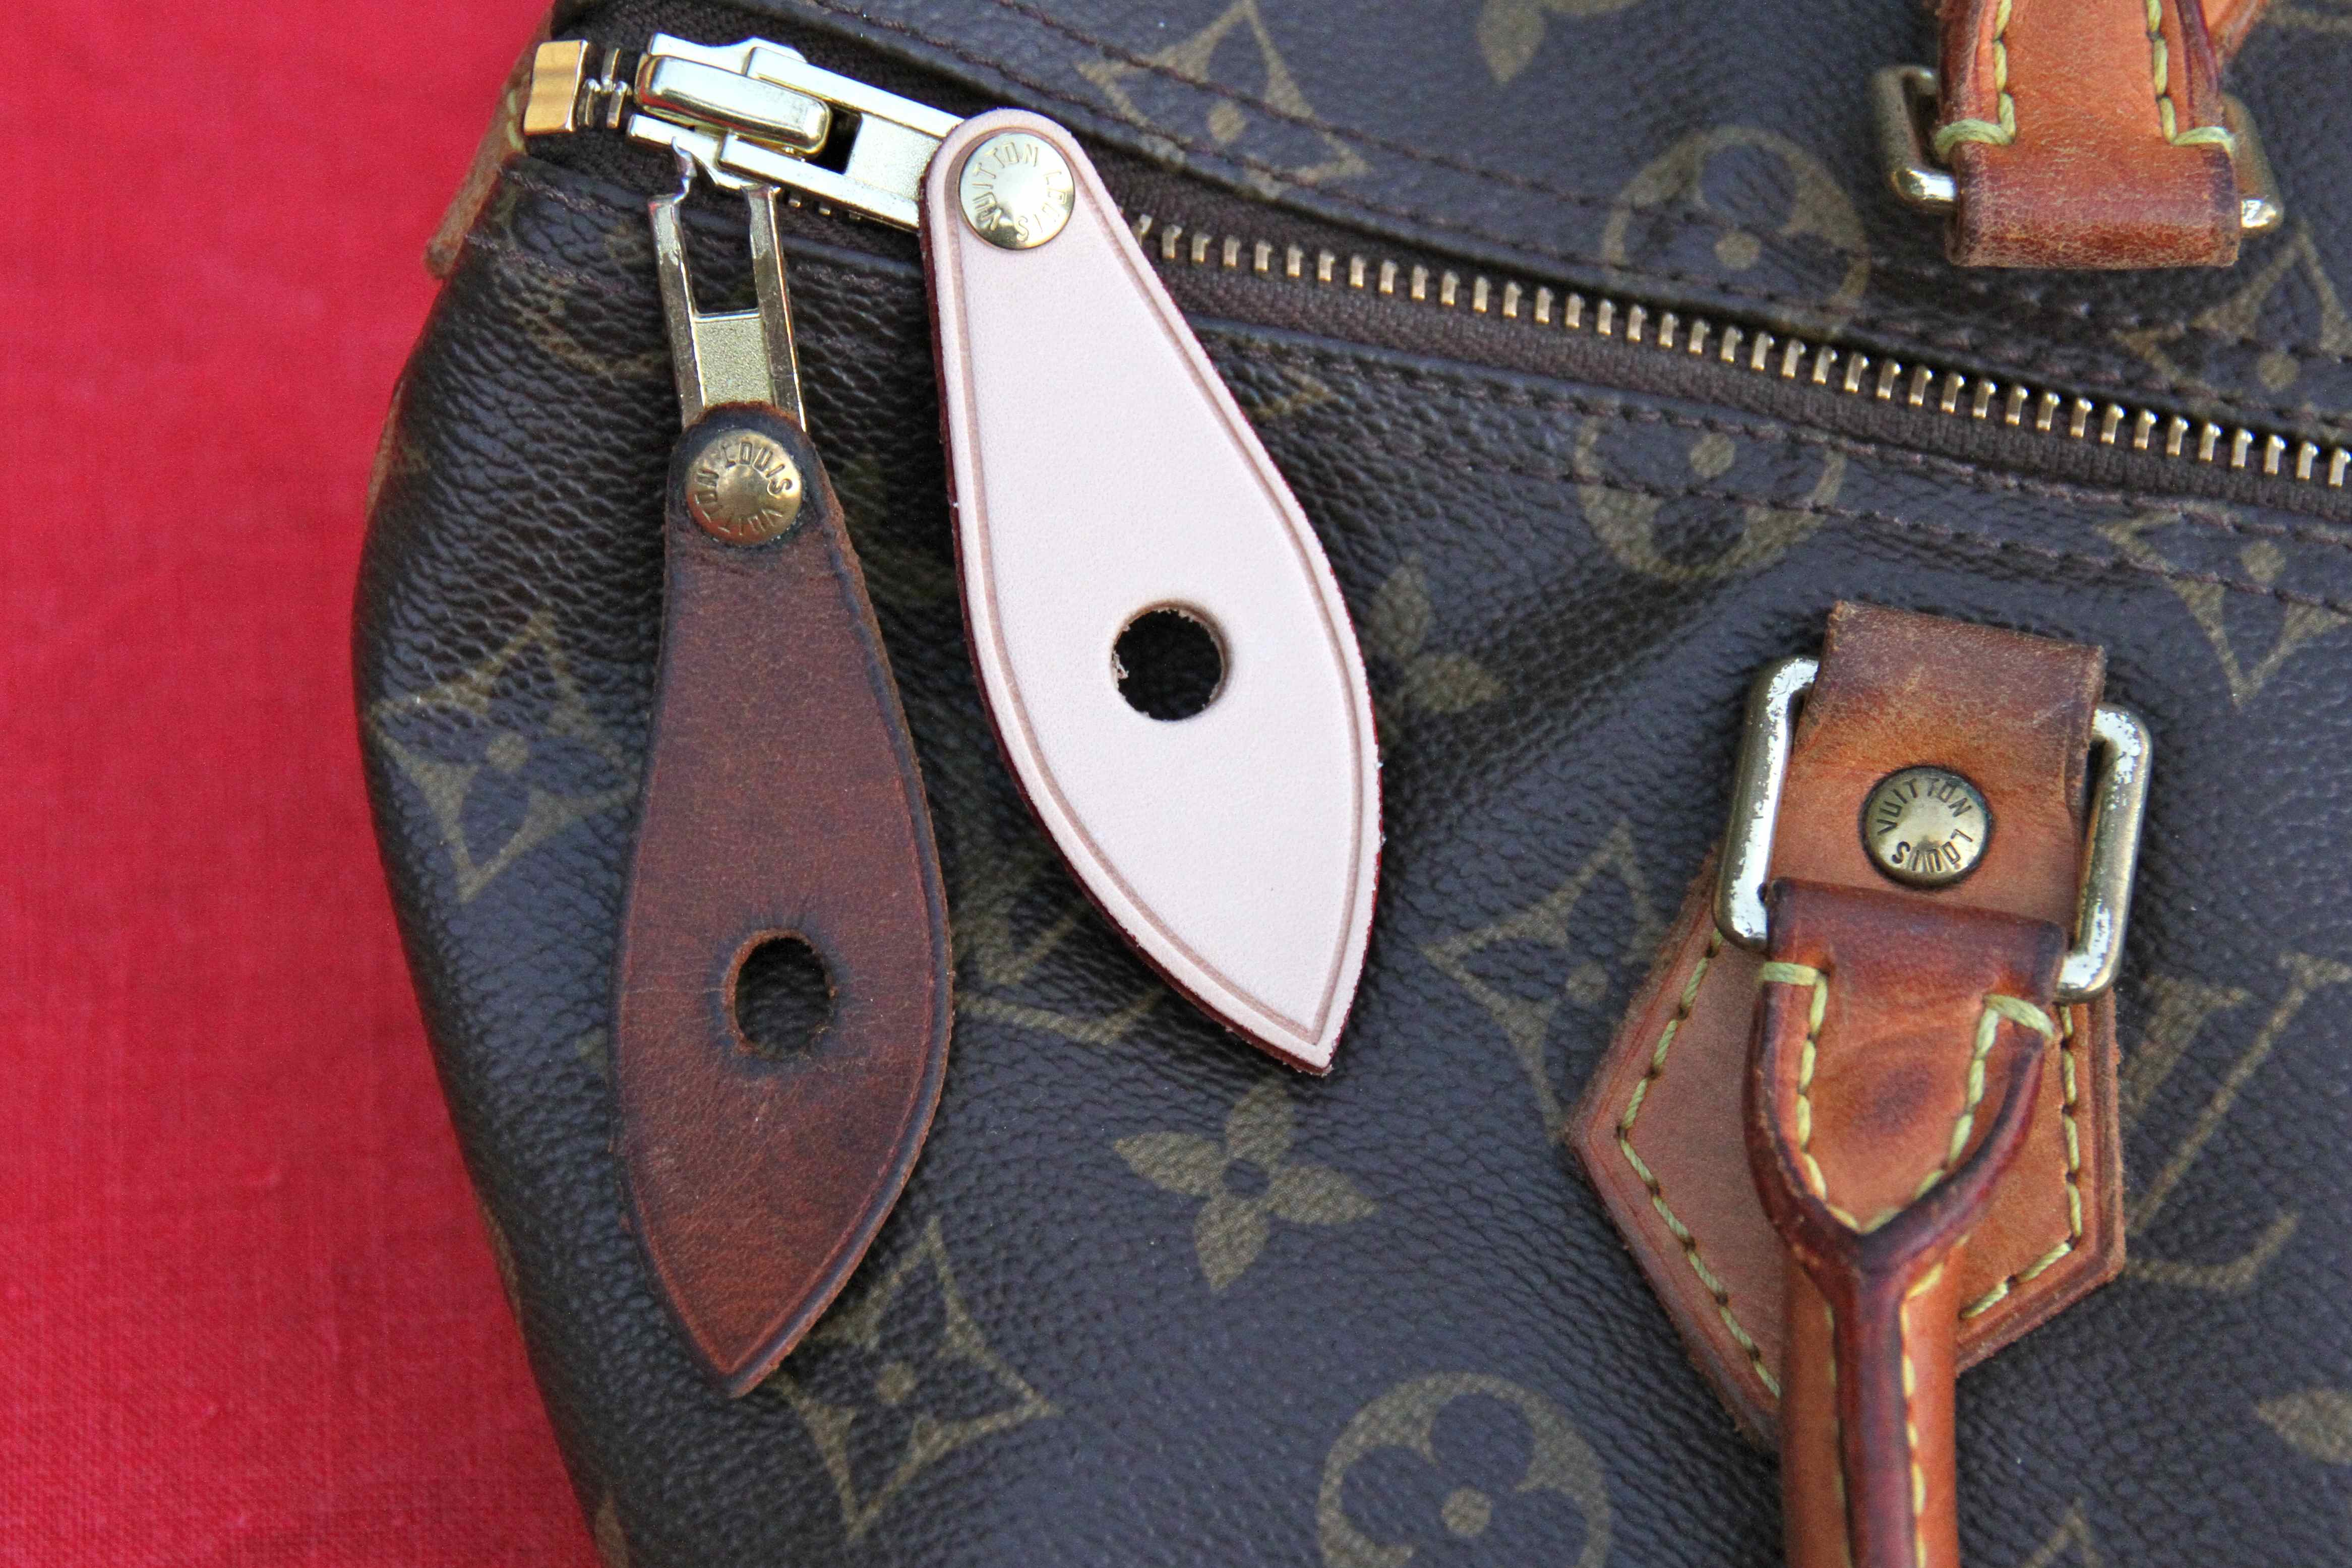 Louis Vuitton Bag Zipper Repair | Confederated Tribes of the Umatilla Indian Reservation